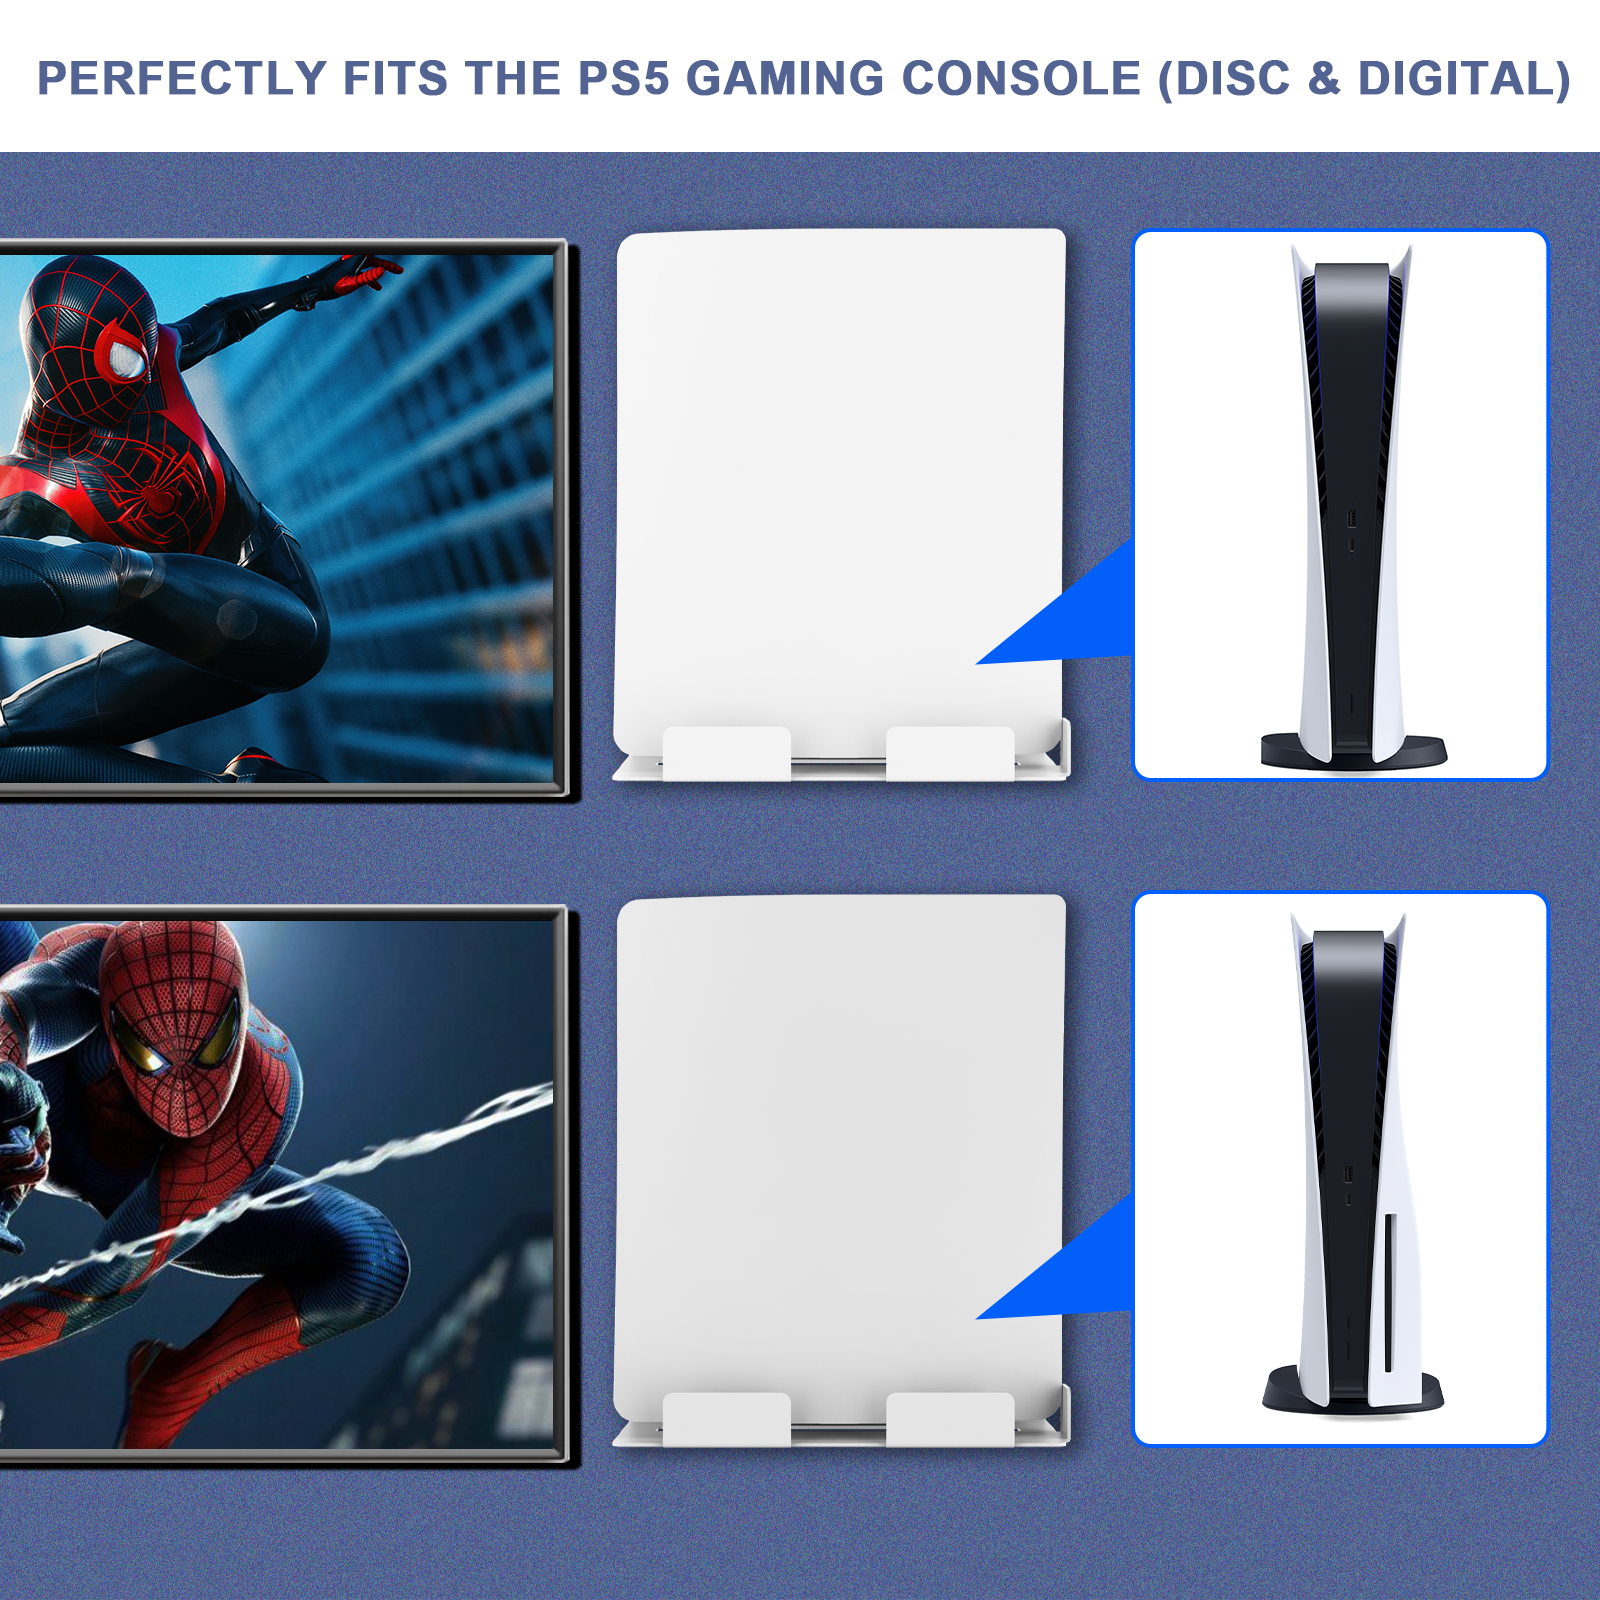 Both PS5 Digital Edition and Disc Edition can be wall-mounted next to the TV